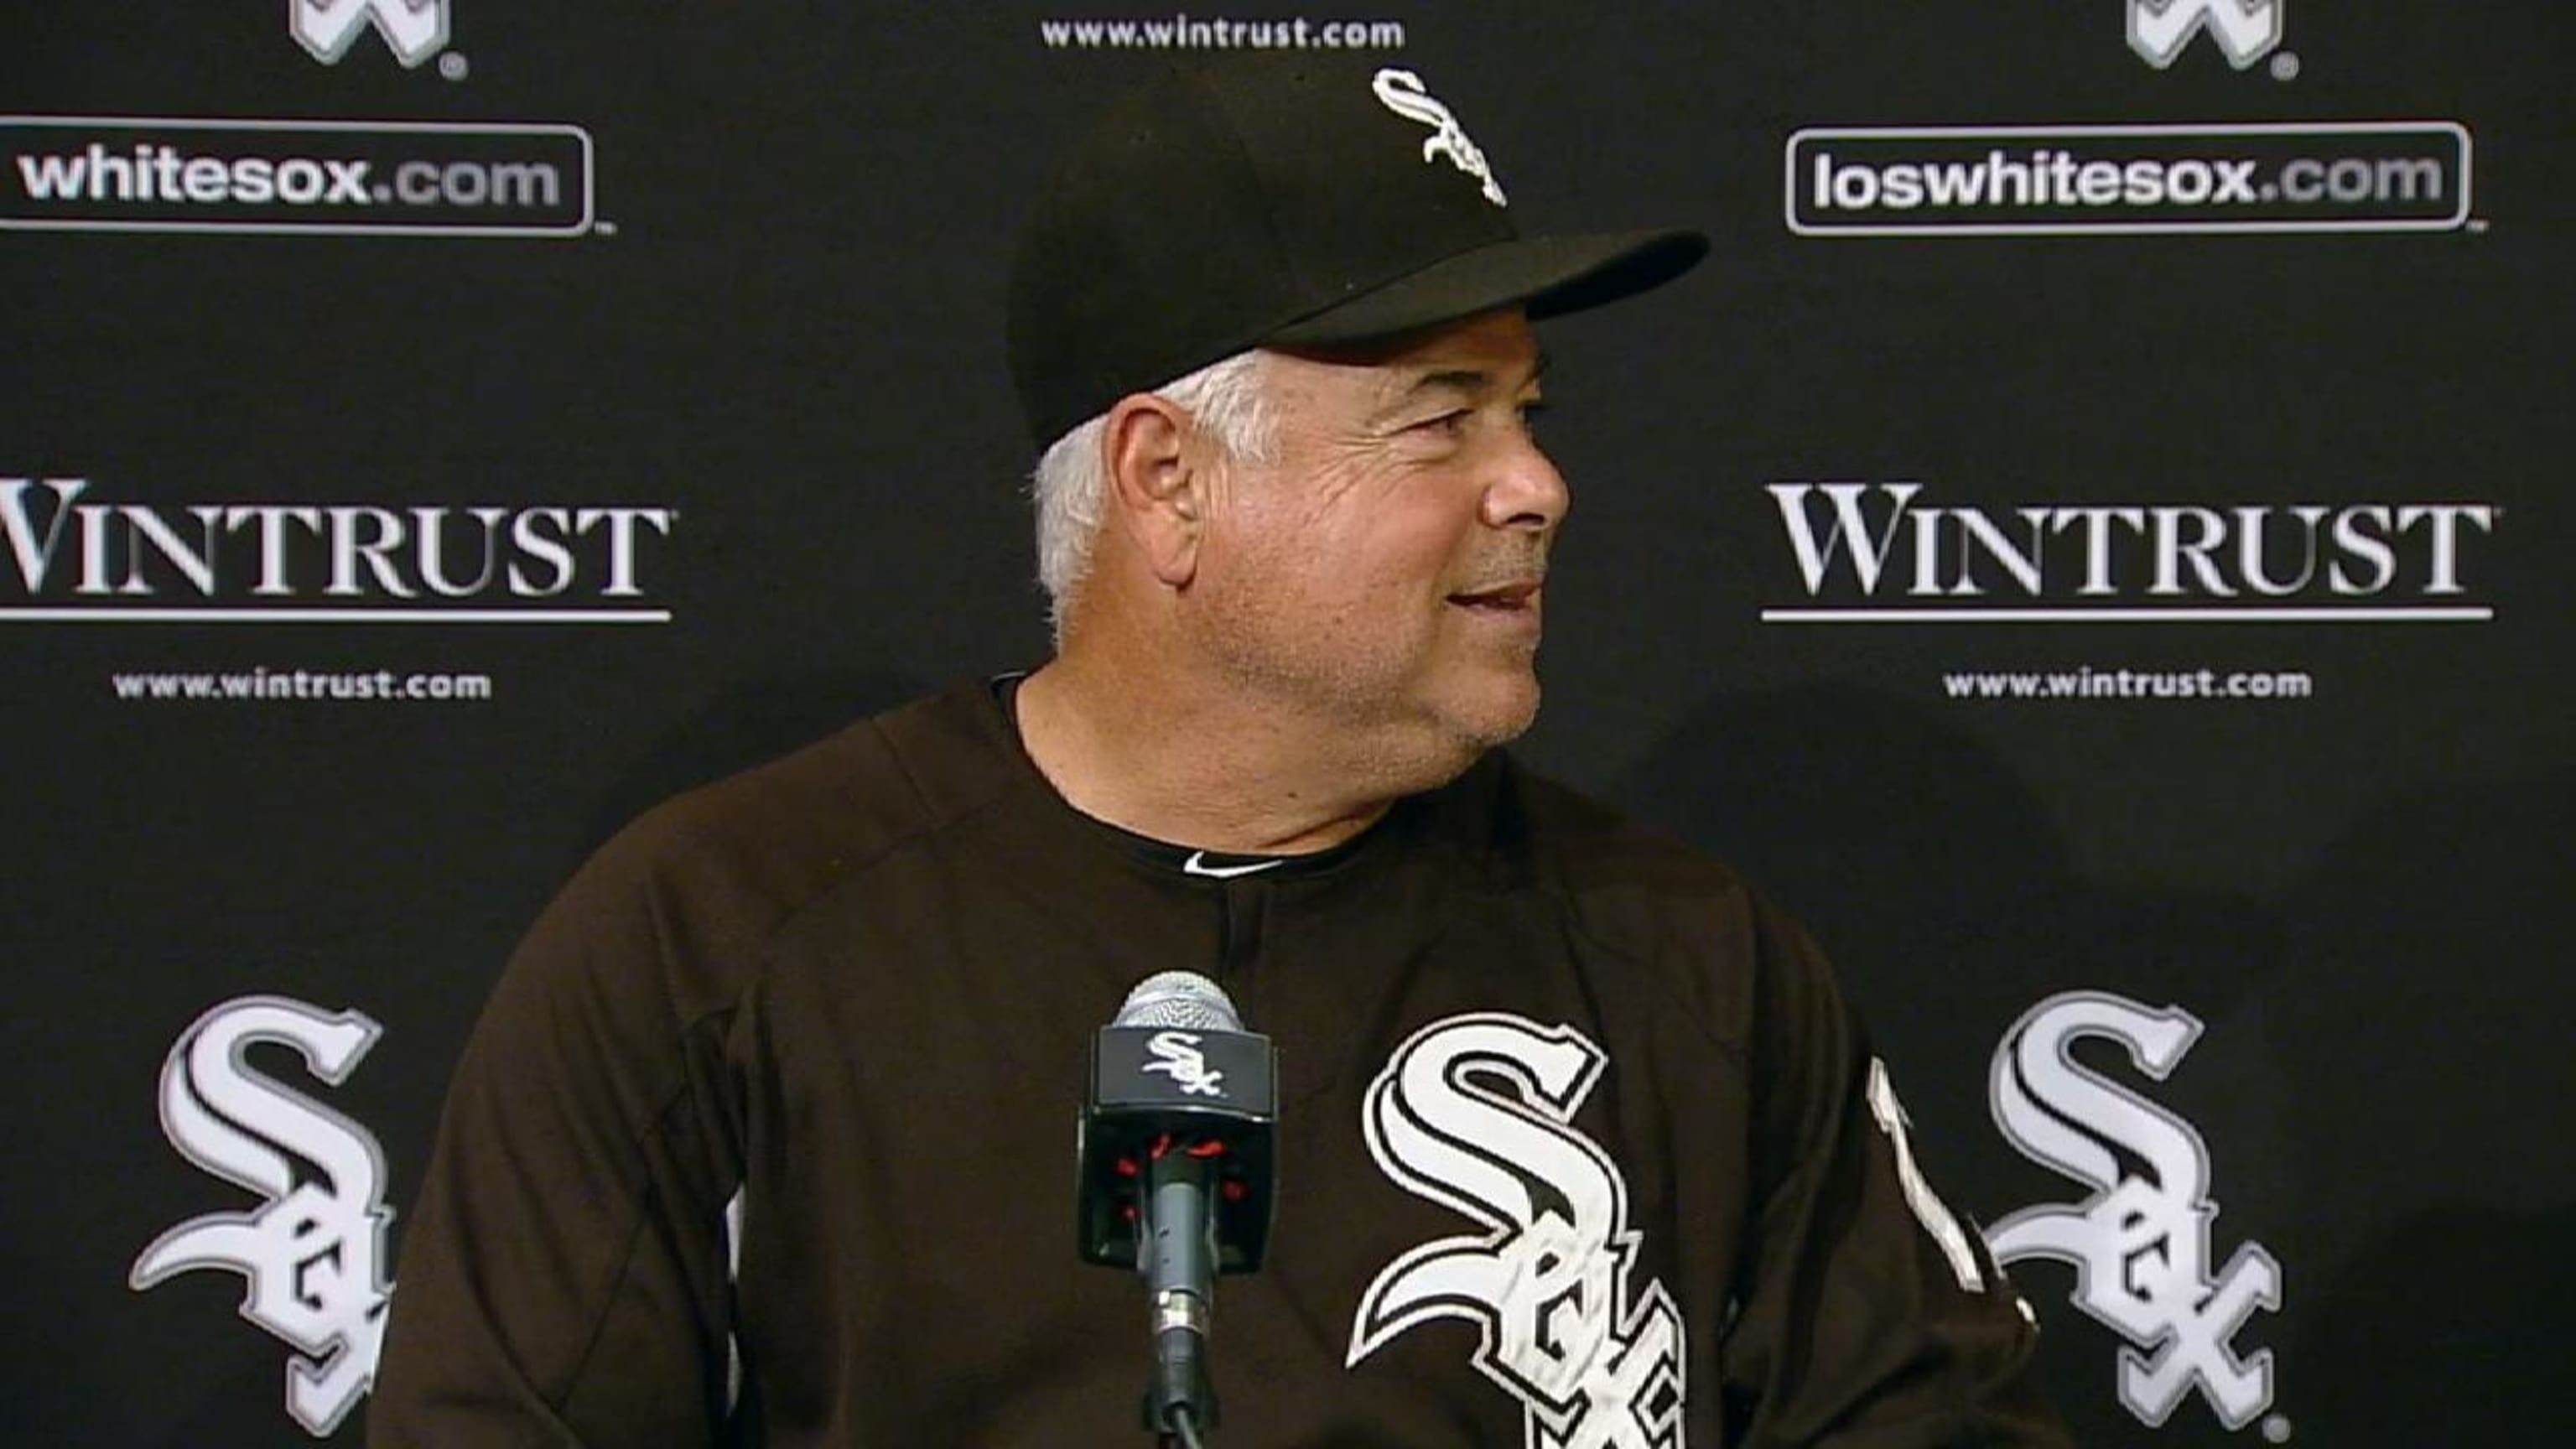 You get it,' Carlos Rodon says of White Sox letting him walk